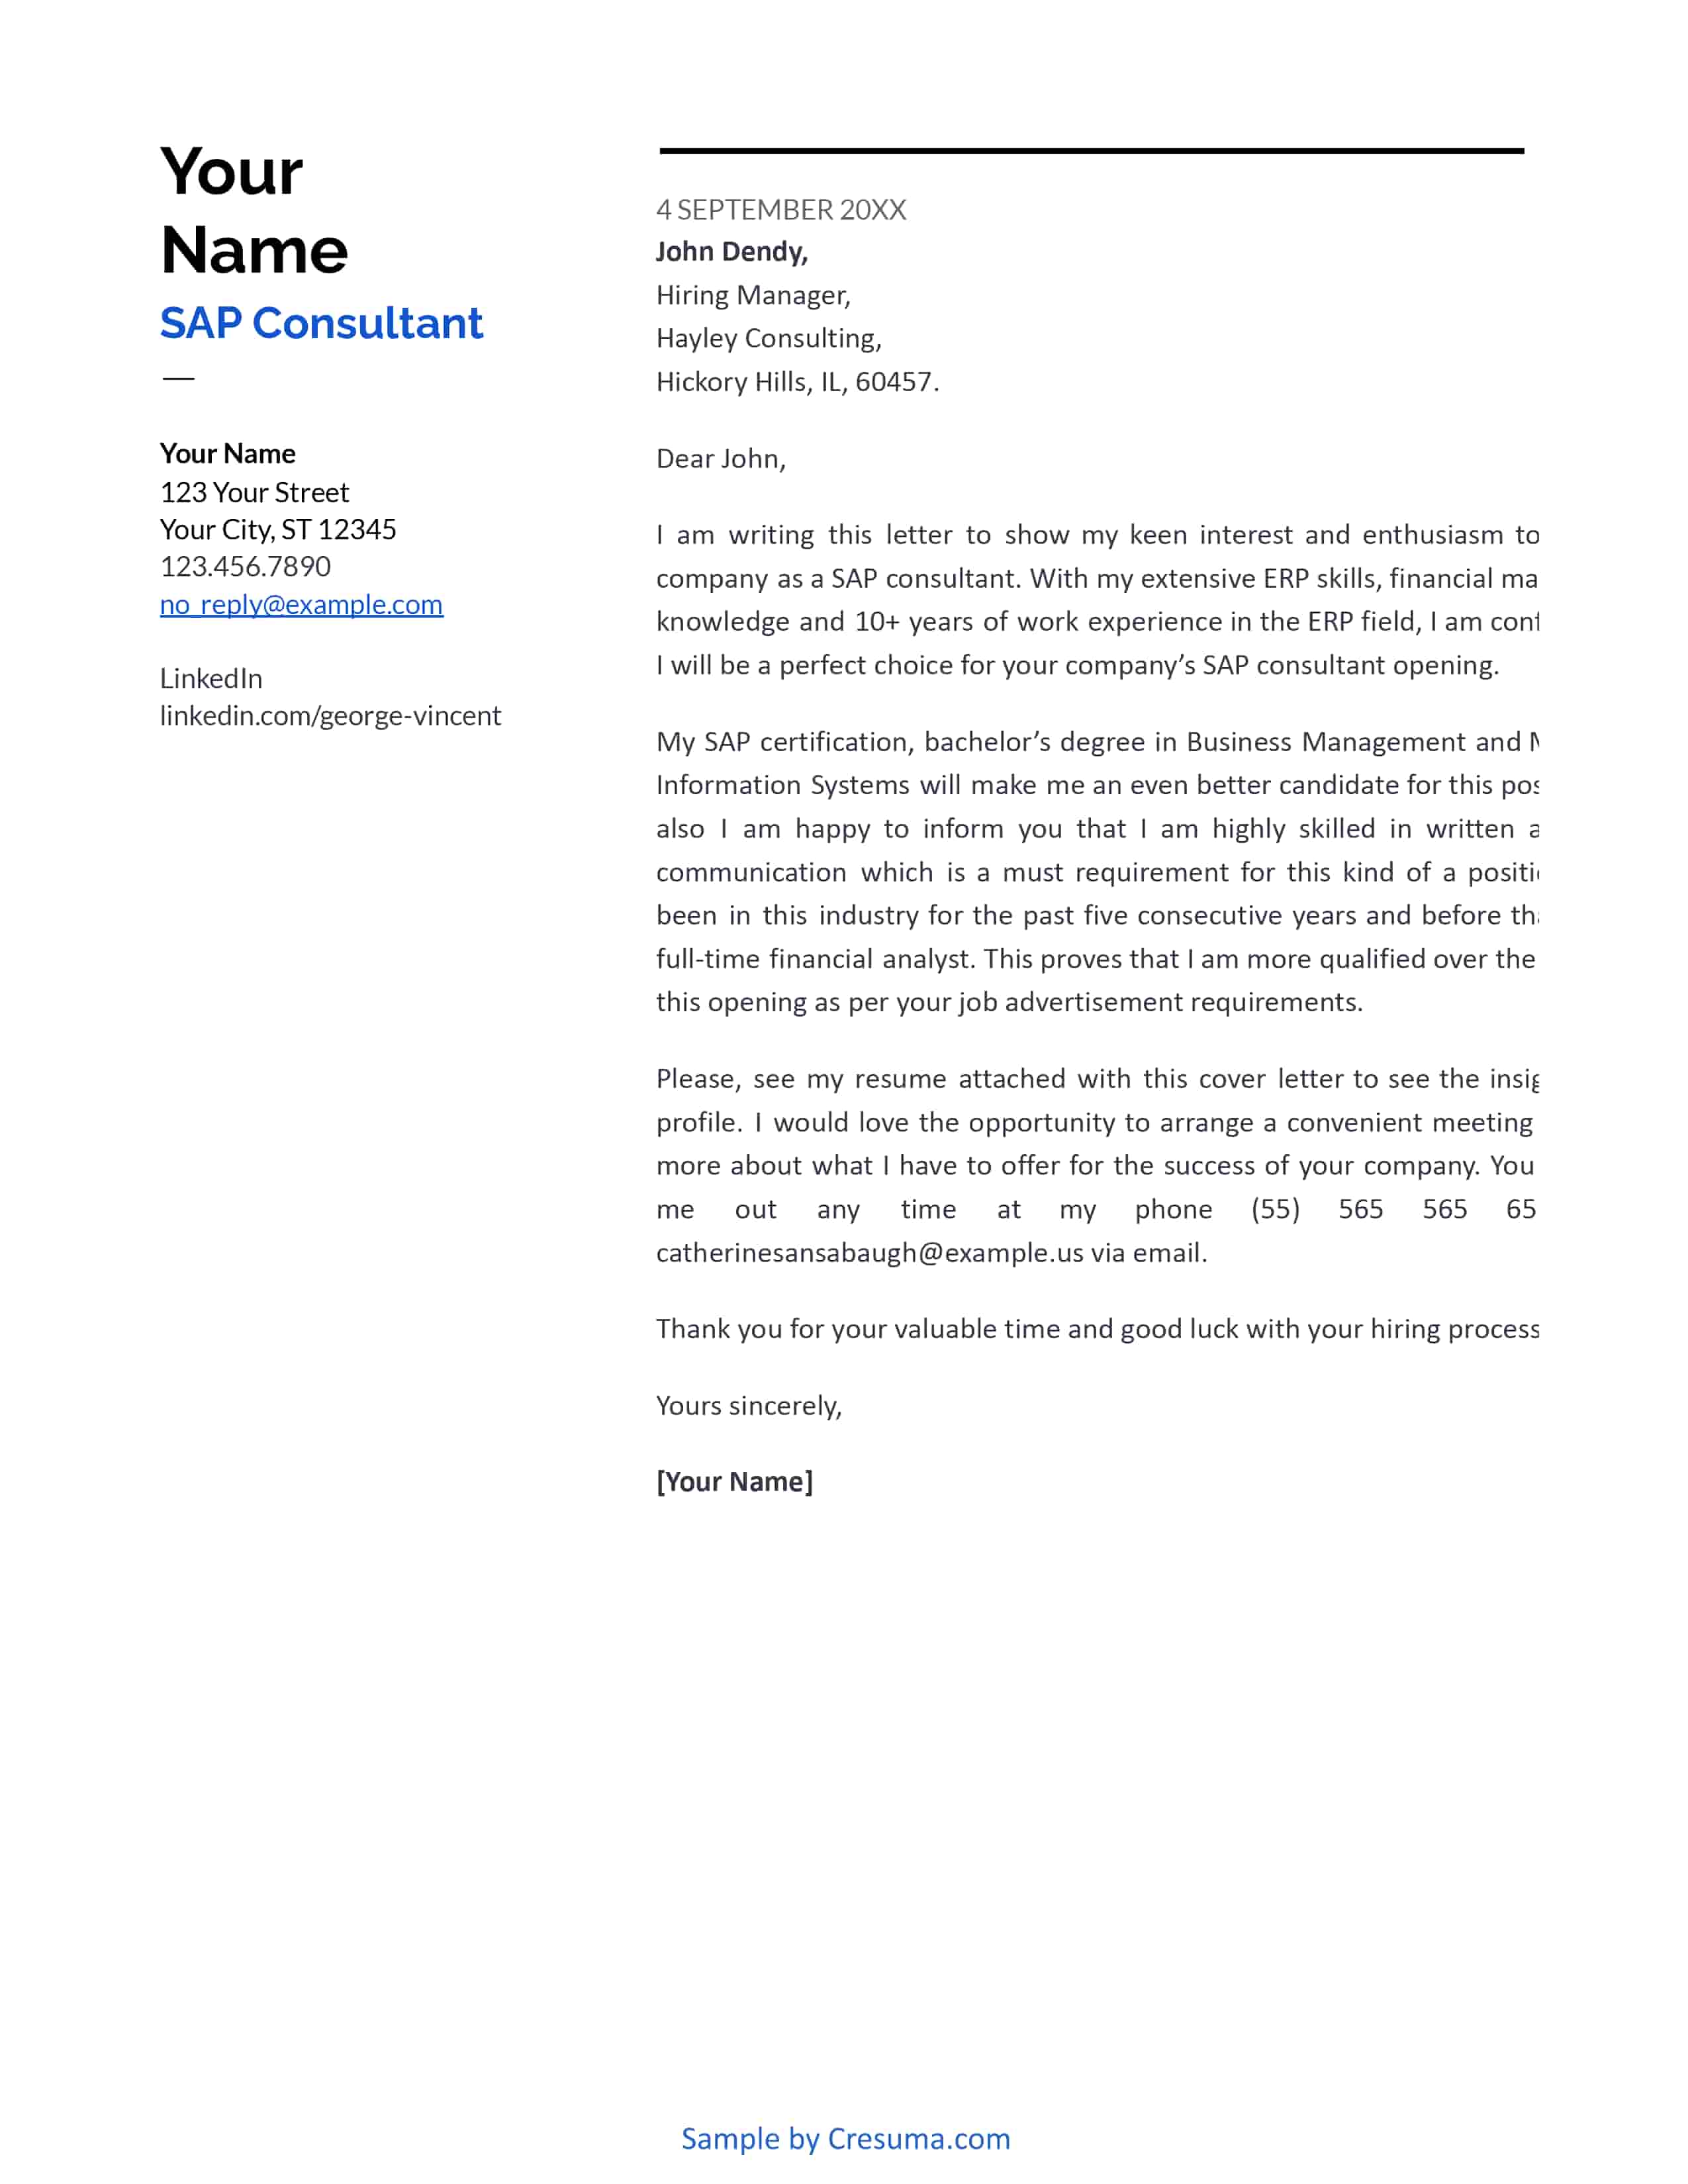 sap consultant cover letter example